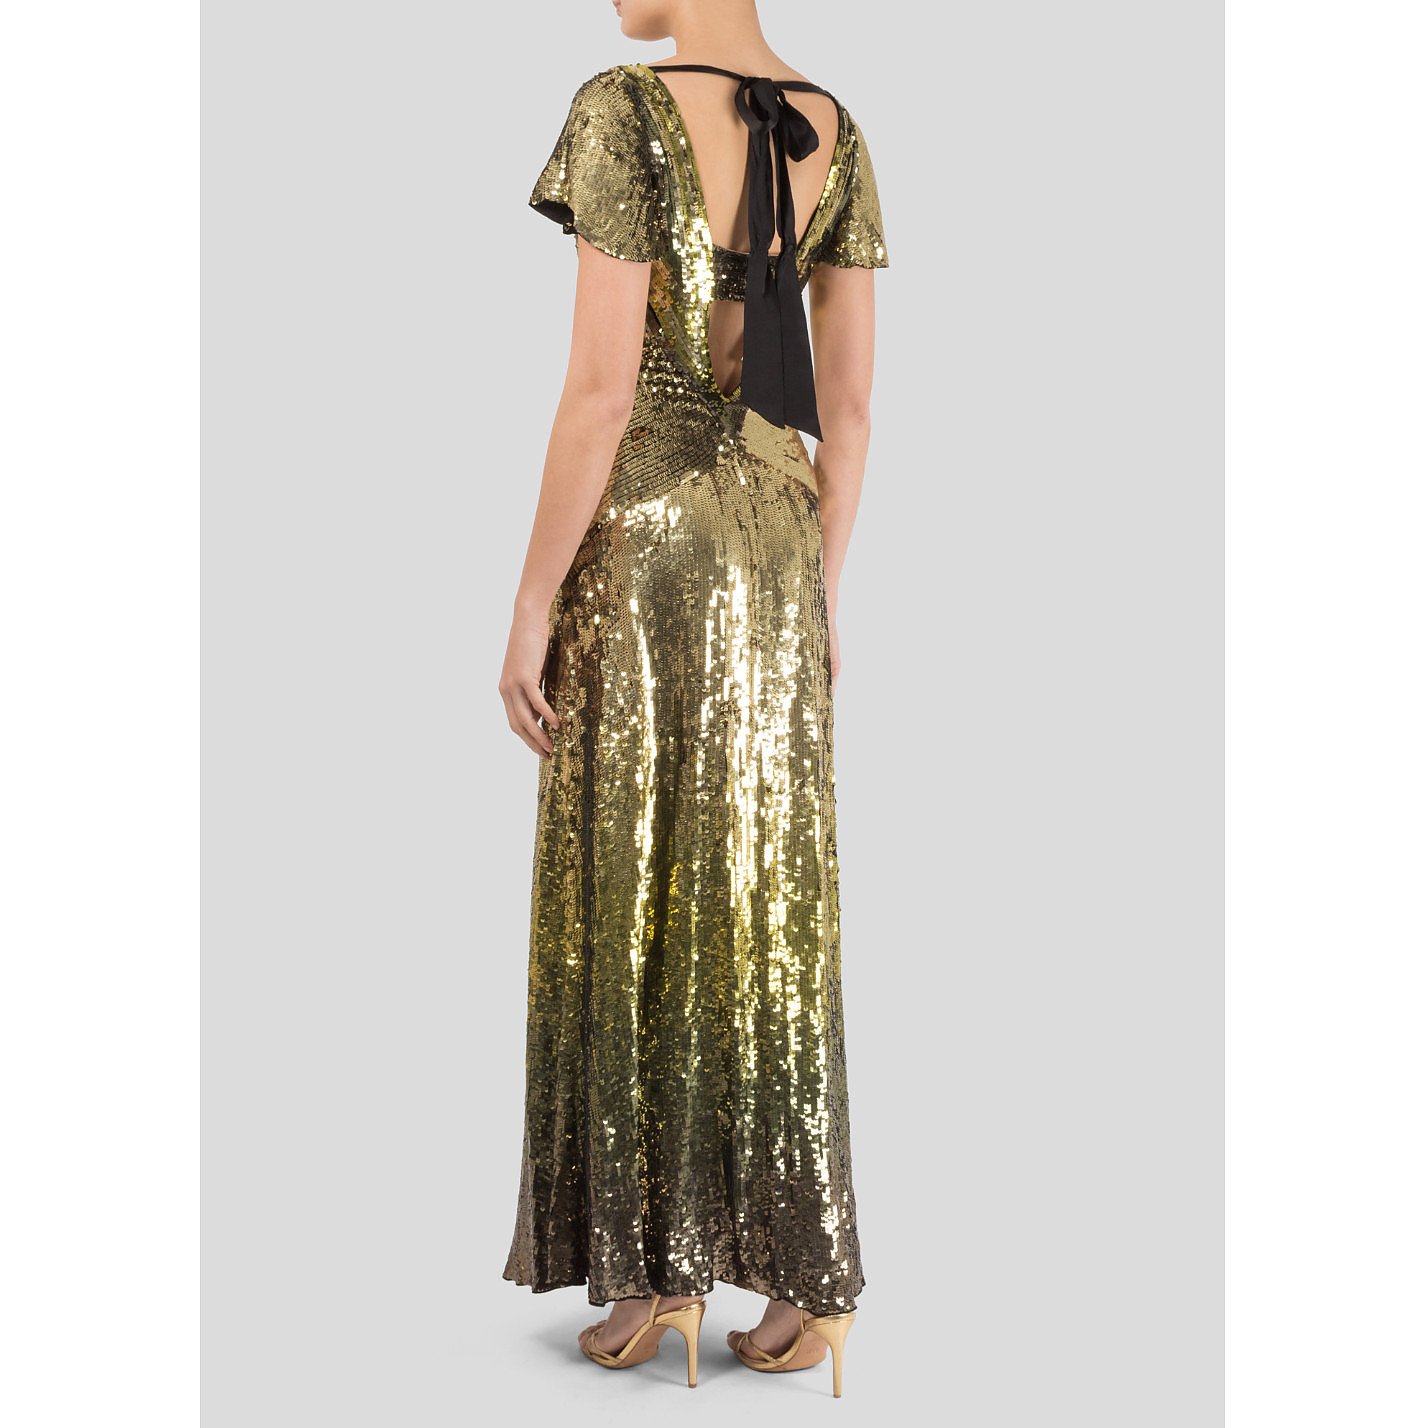 Temperley London Ruth Sequin Gown